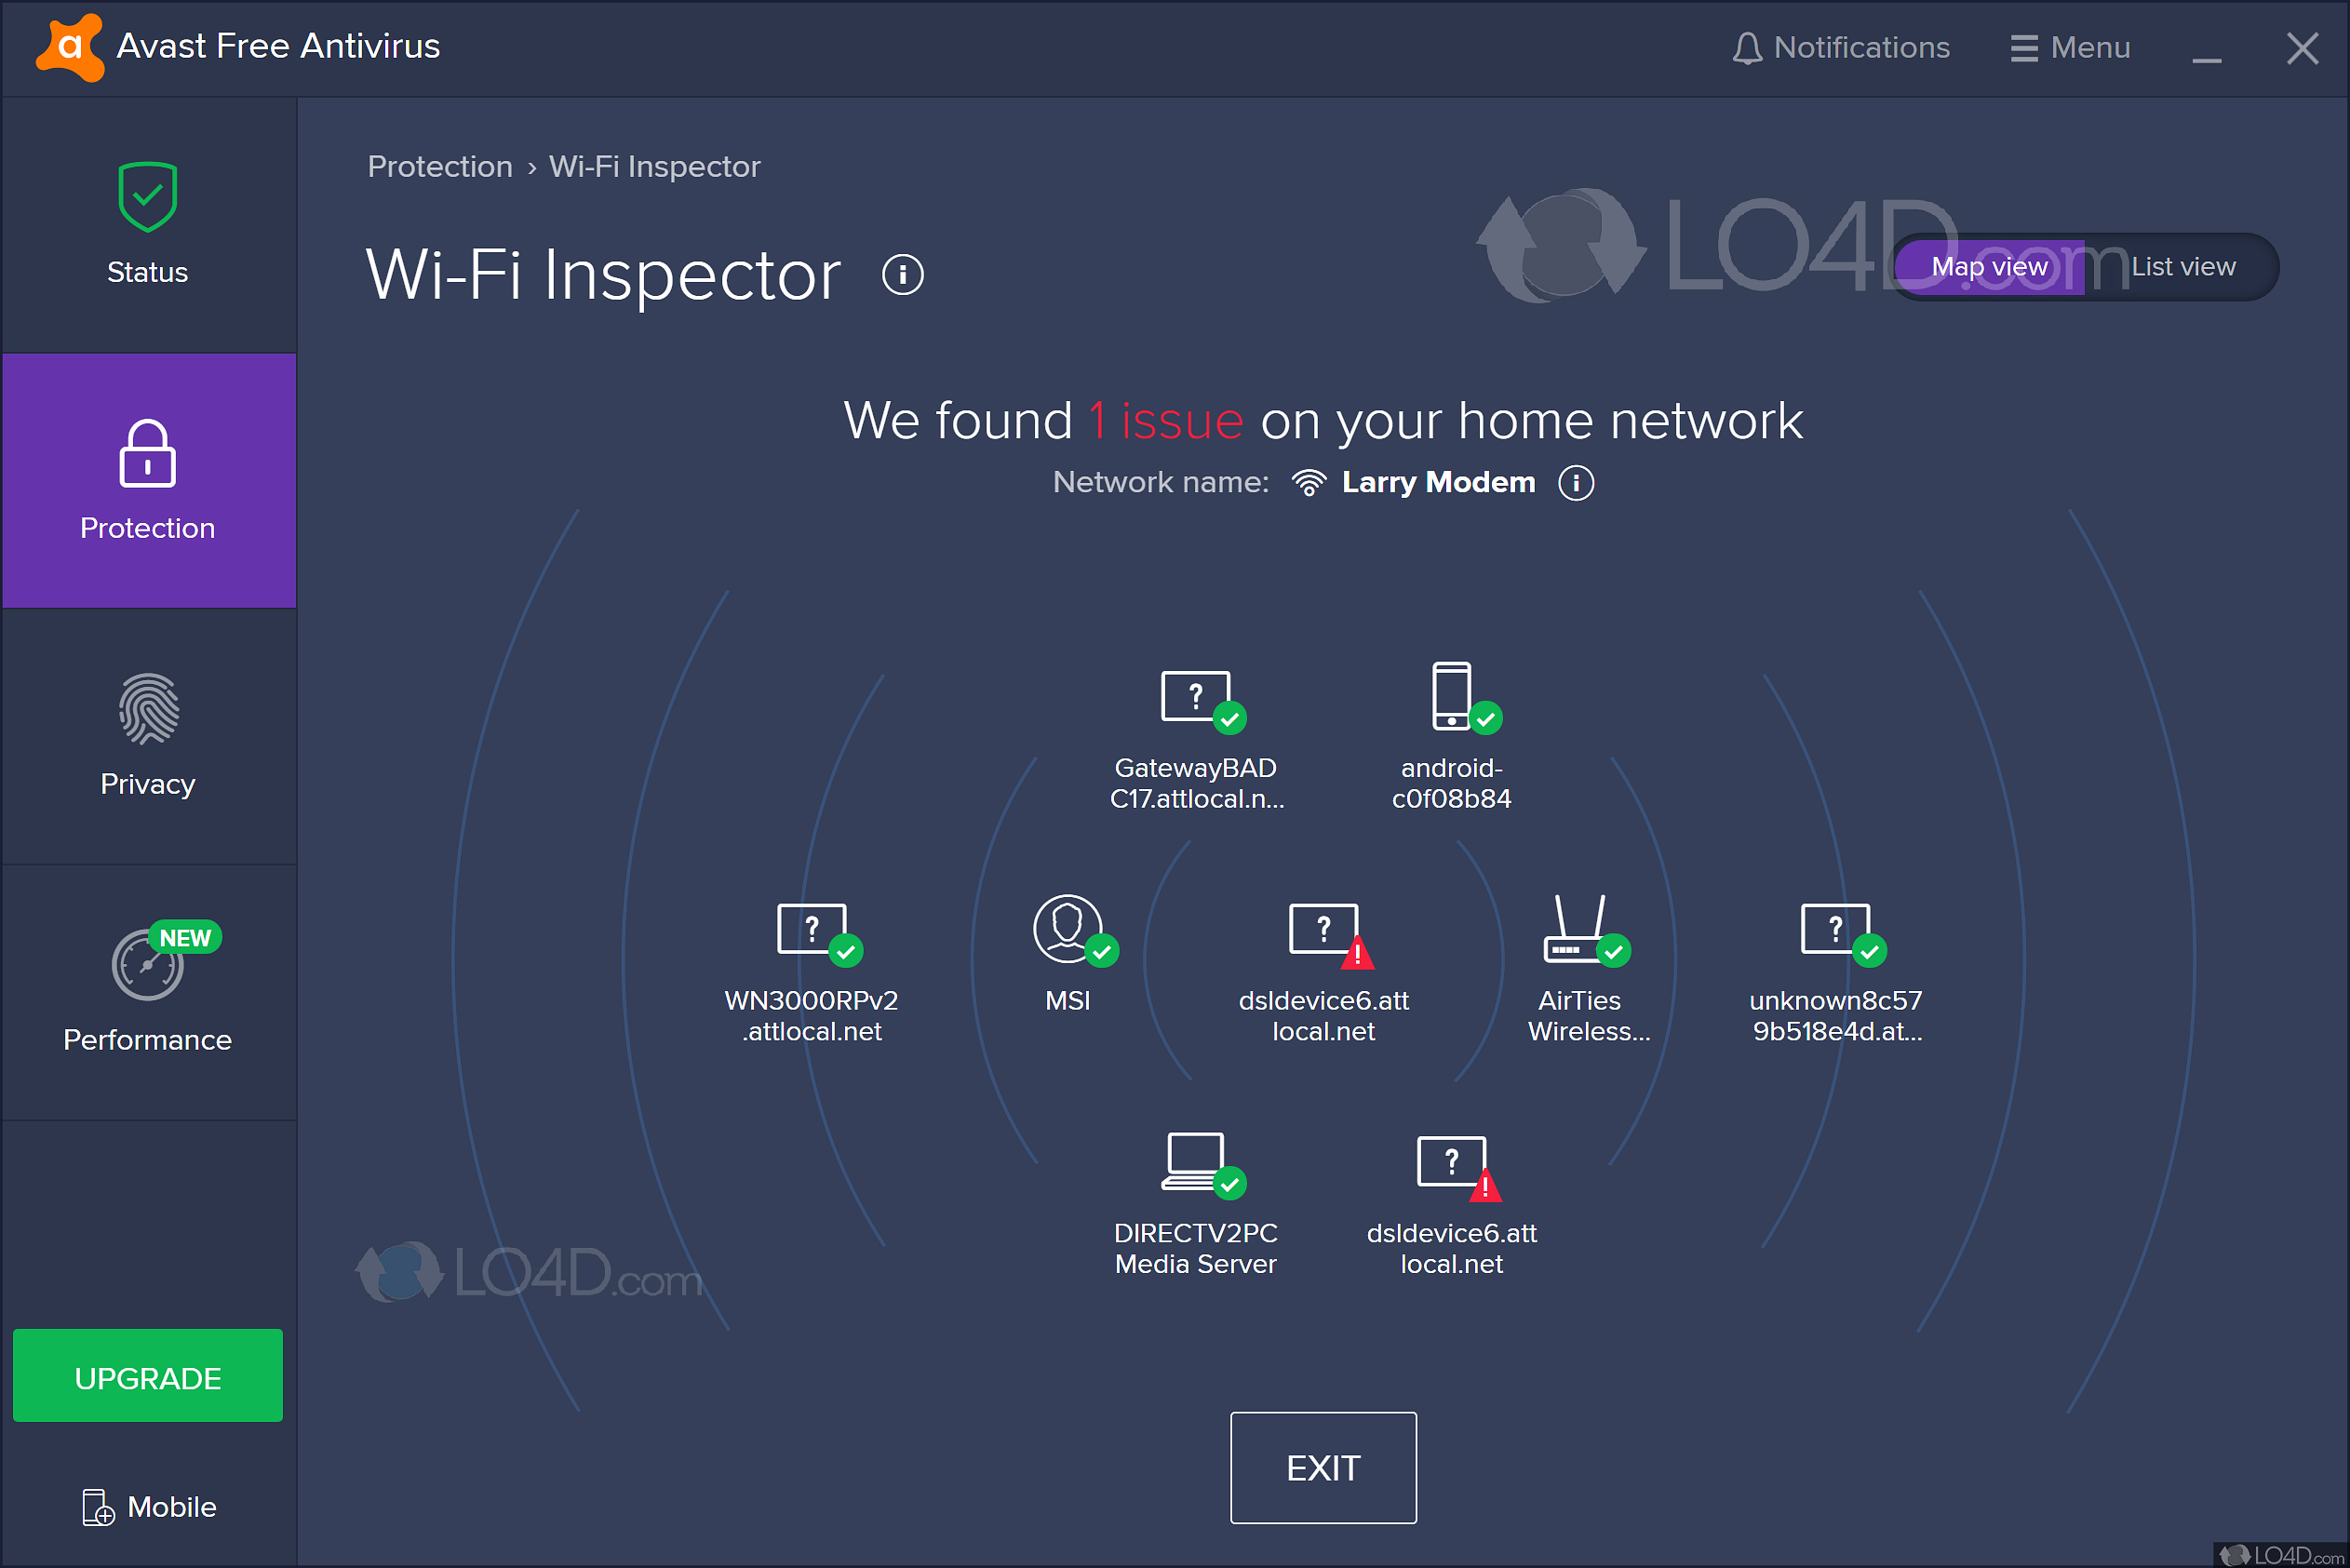 free avast antivirus for android tablet